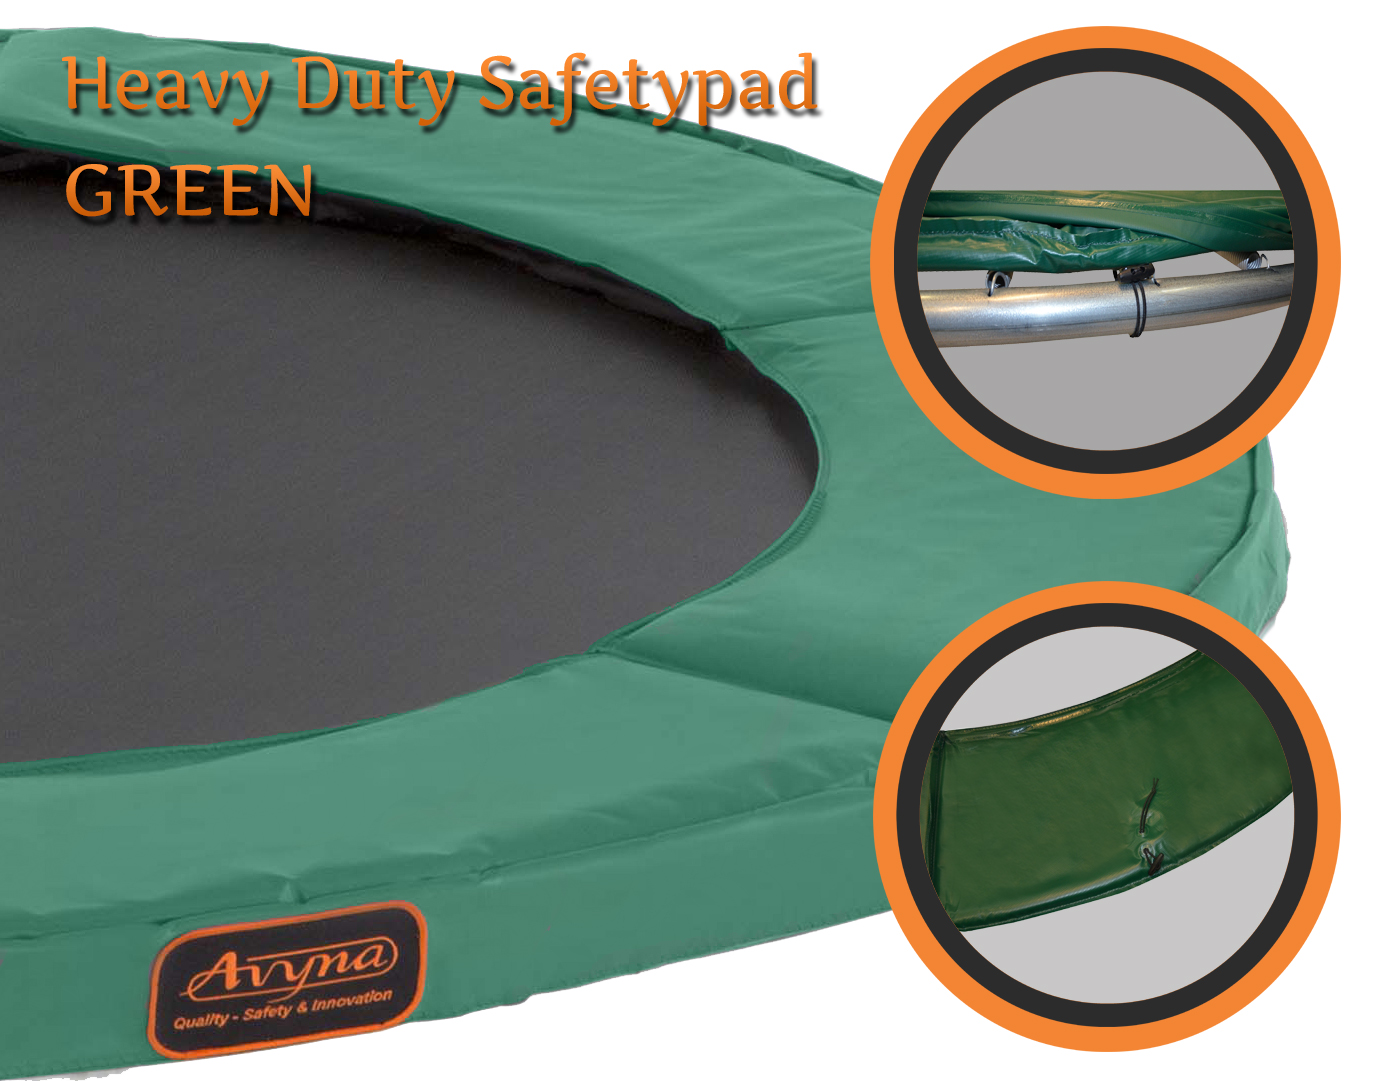 Universal Safety Pad 08ft Heavy Duty Green